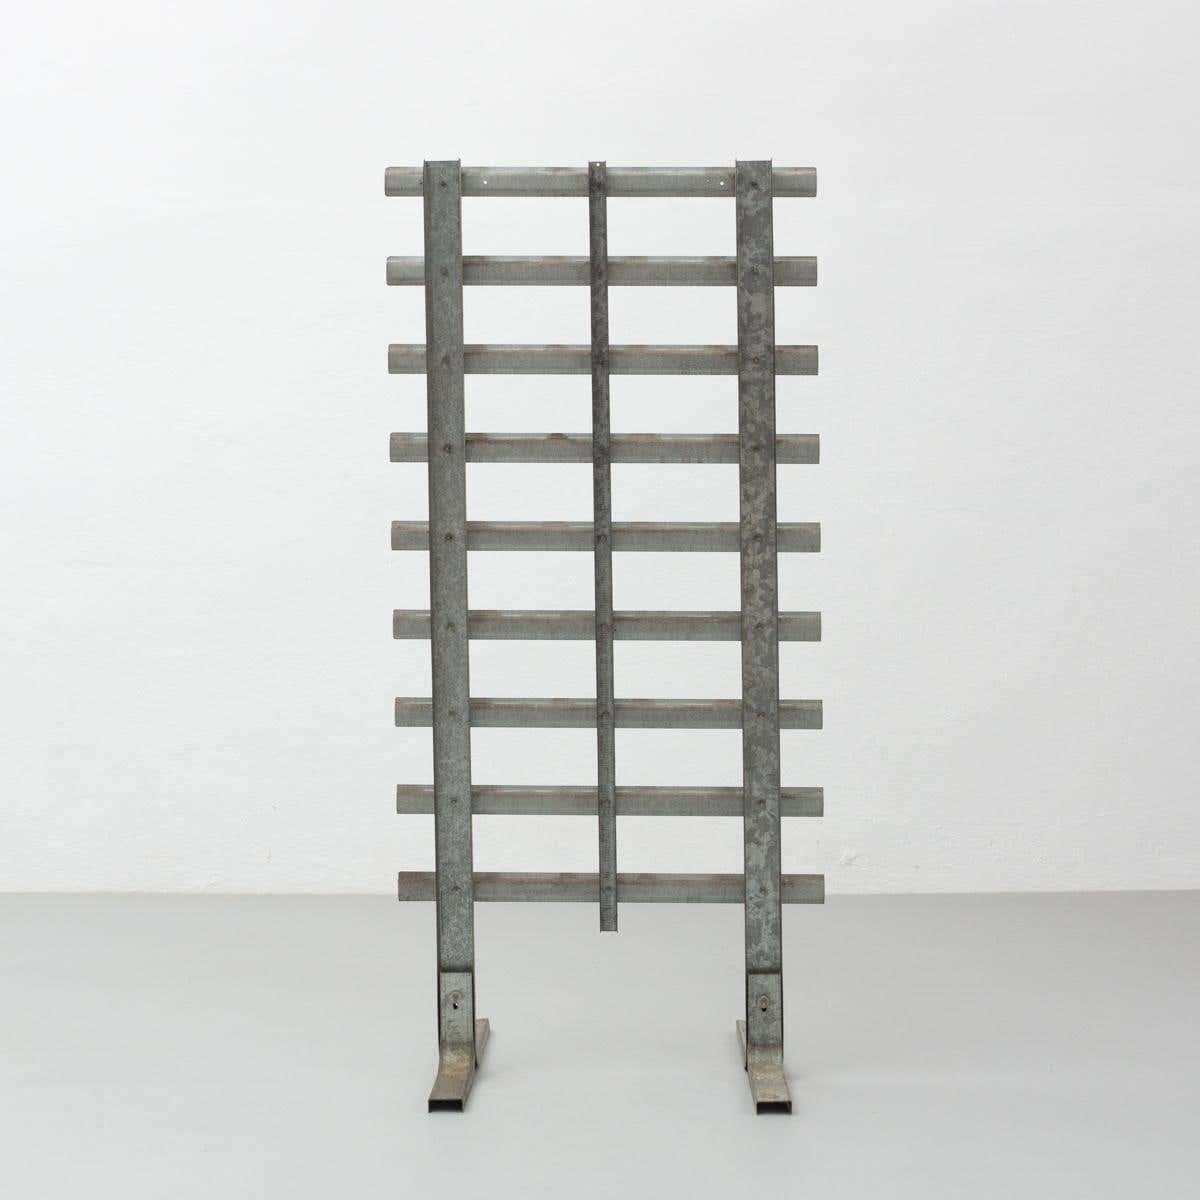 Ramon Horts Contemporary Abstract Minimalist Sculpture in Metal In Good Condition For Sale In Barcelona, Barcelona